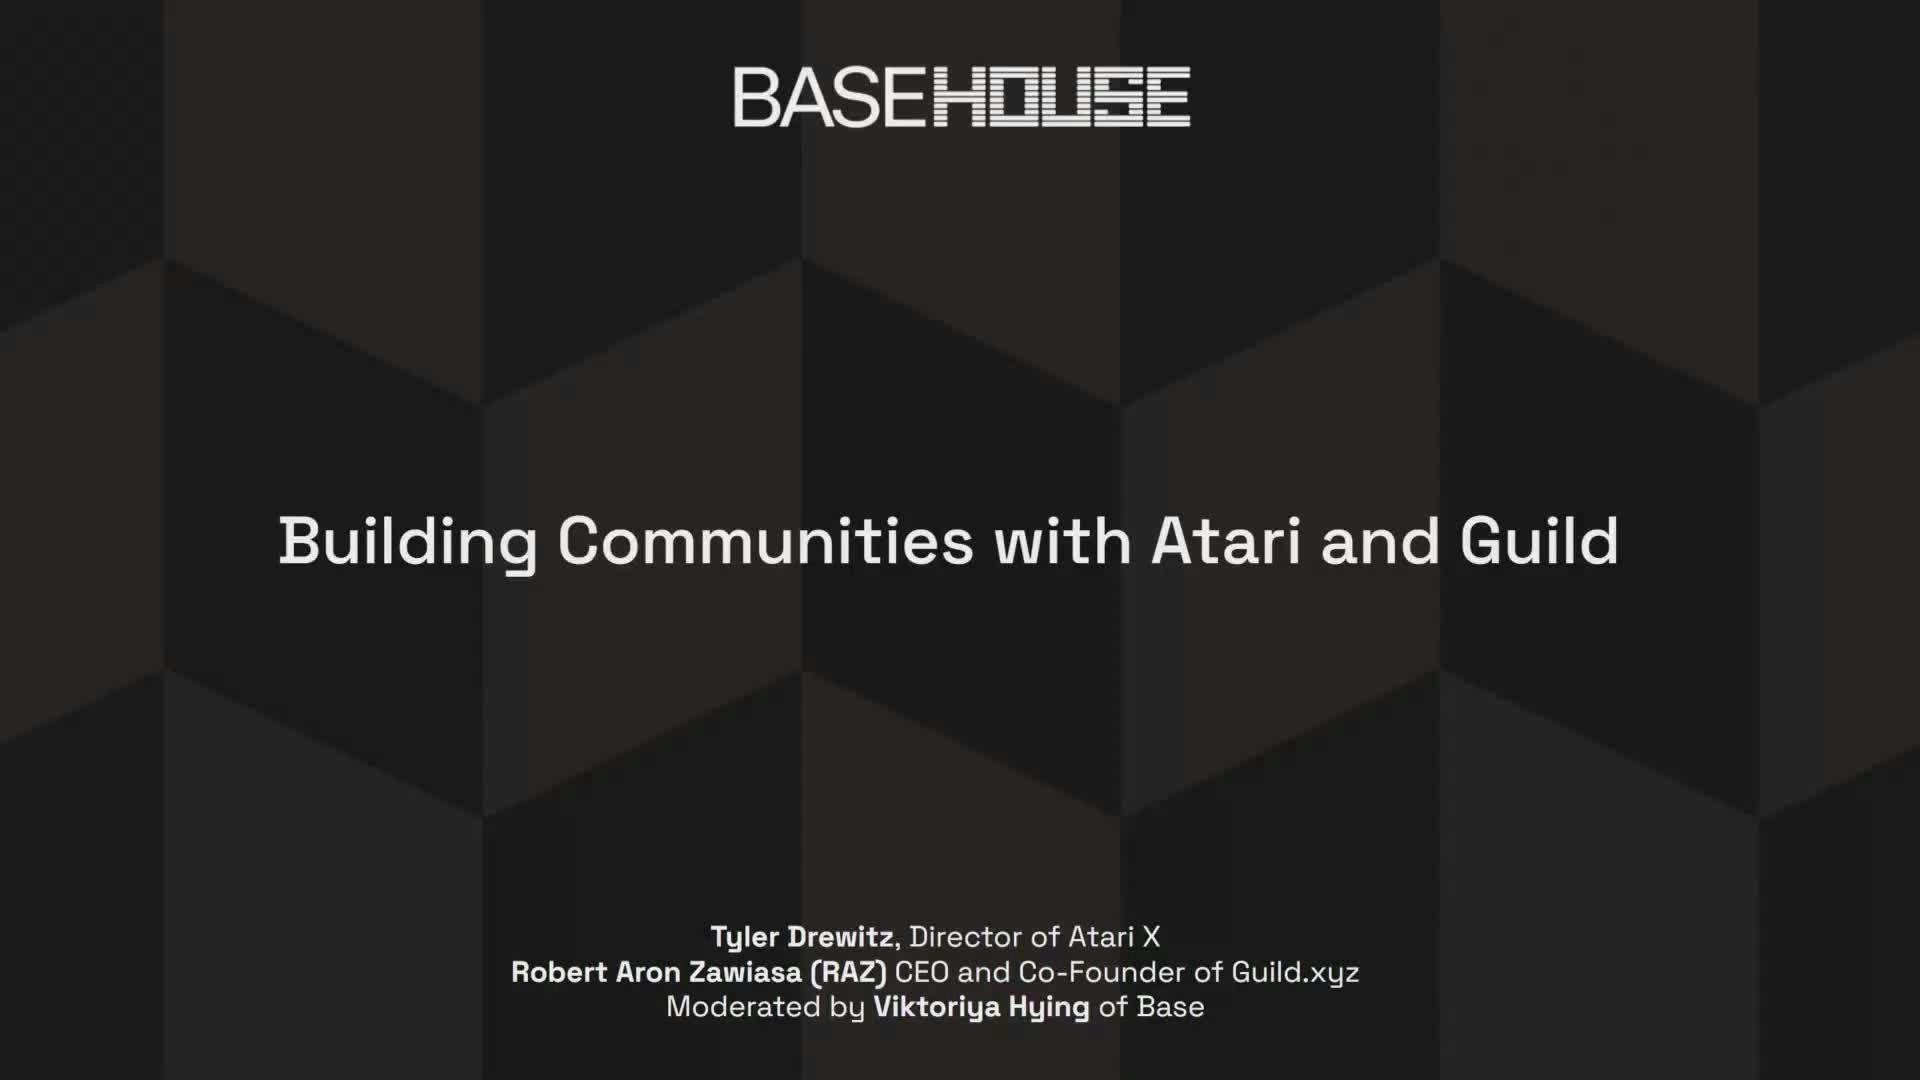 
Building Communities with Atari and Guild